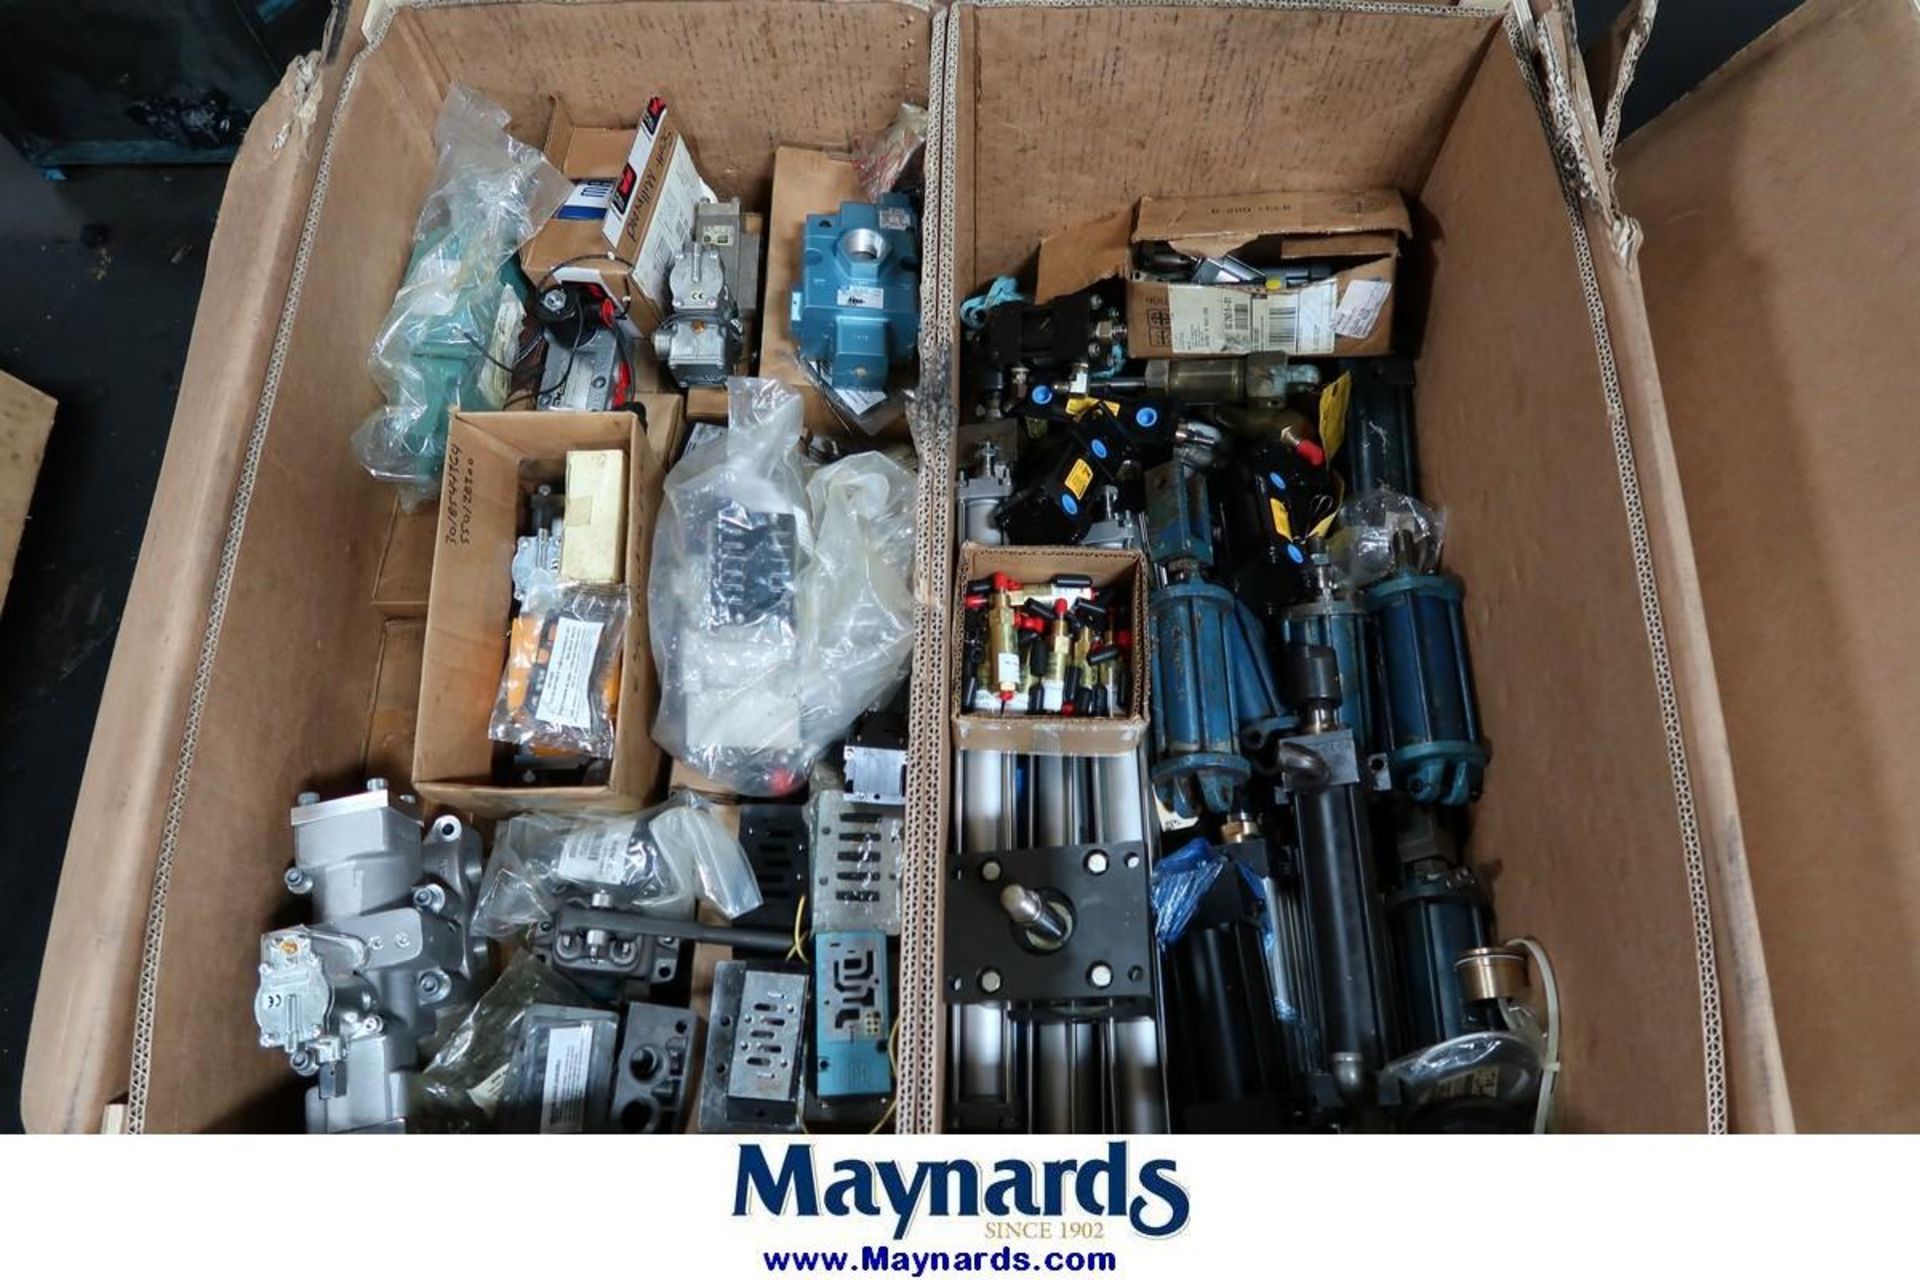 Gaylord of Hydraulic Cylinders, Air Cylinders, Air Valves, & Actuators - Image 2 of 2